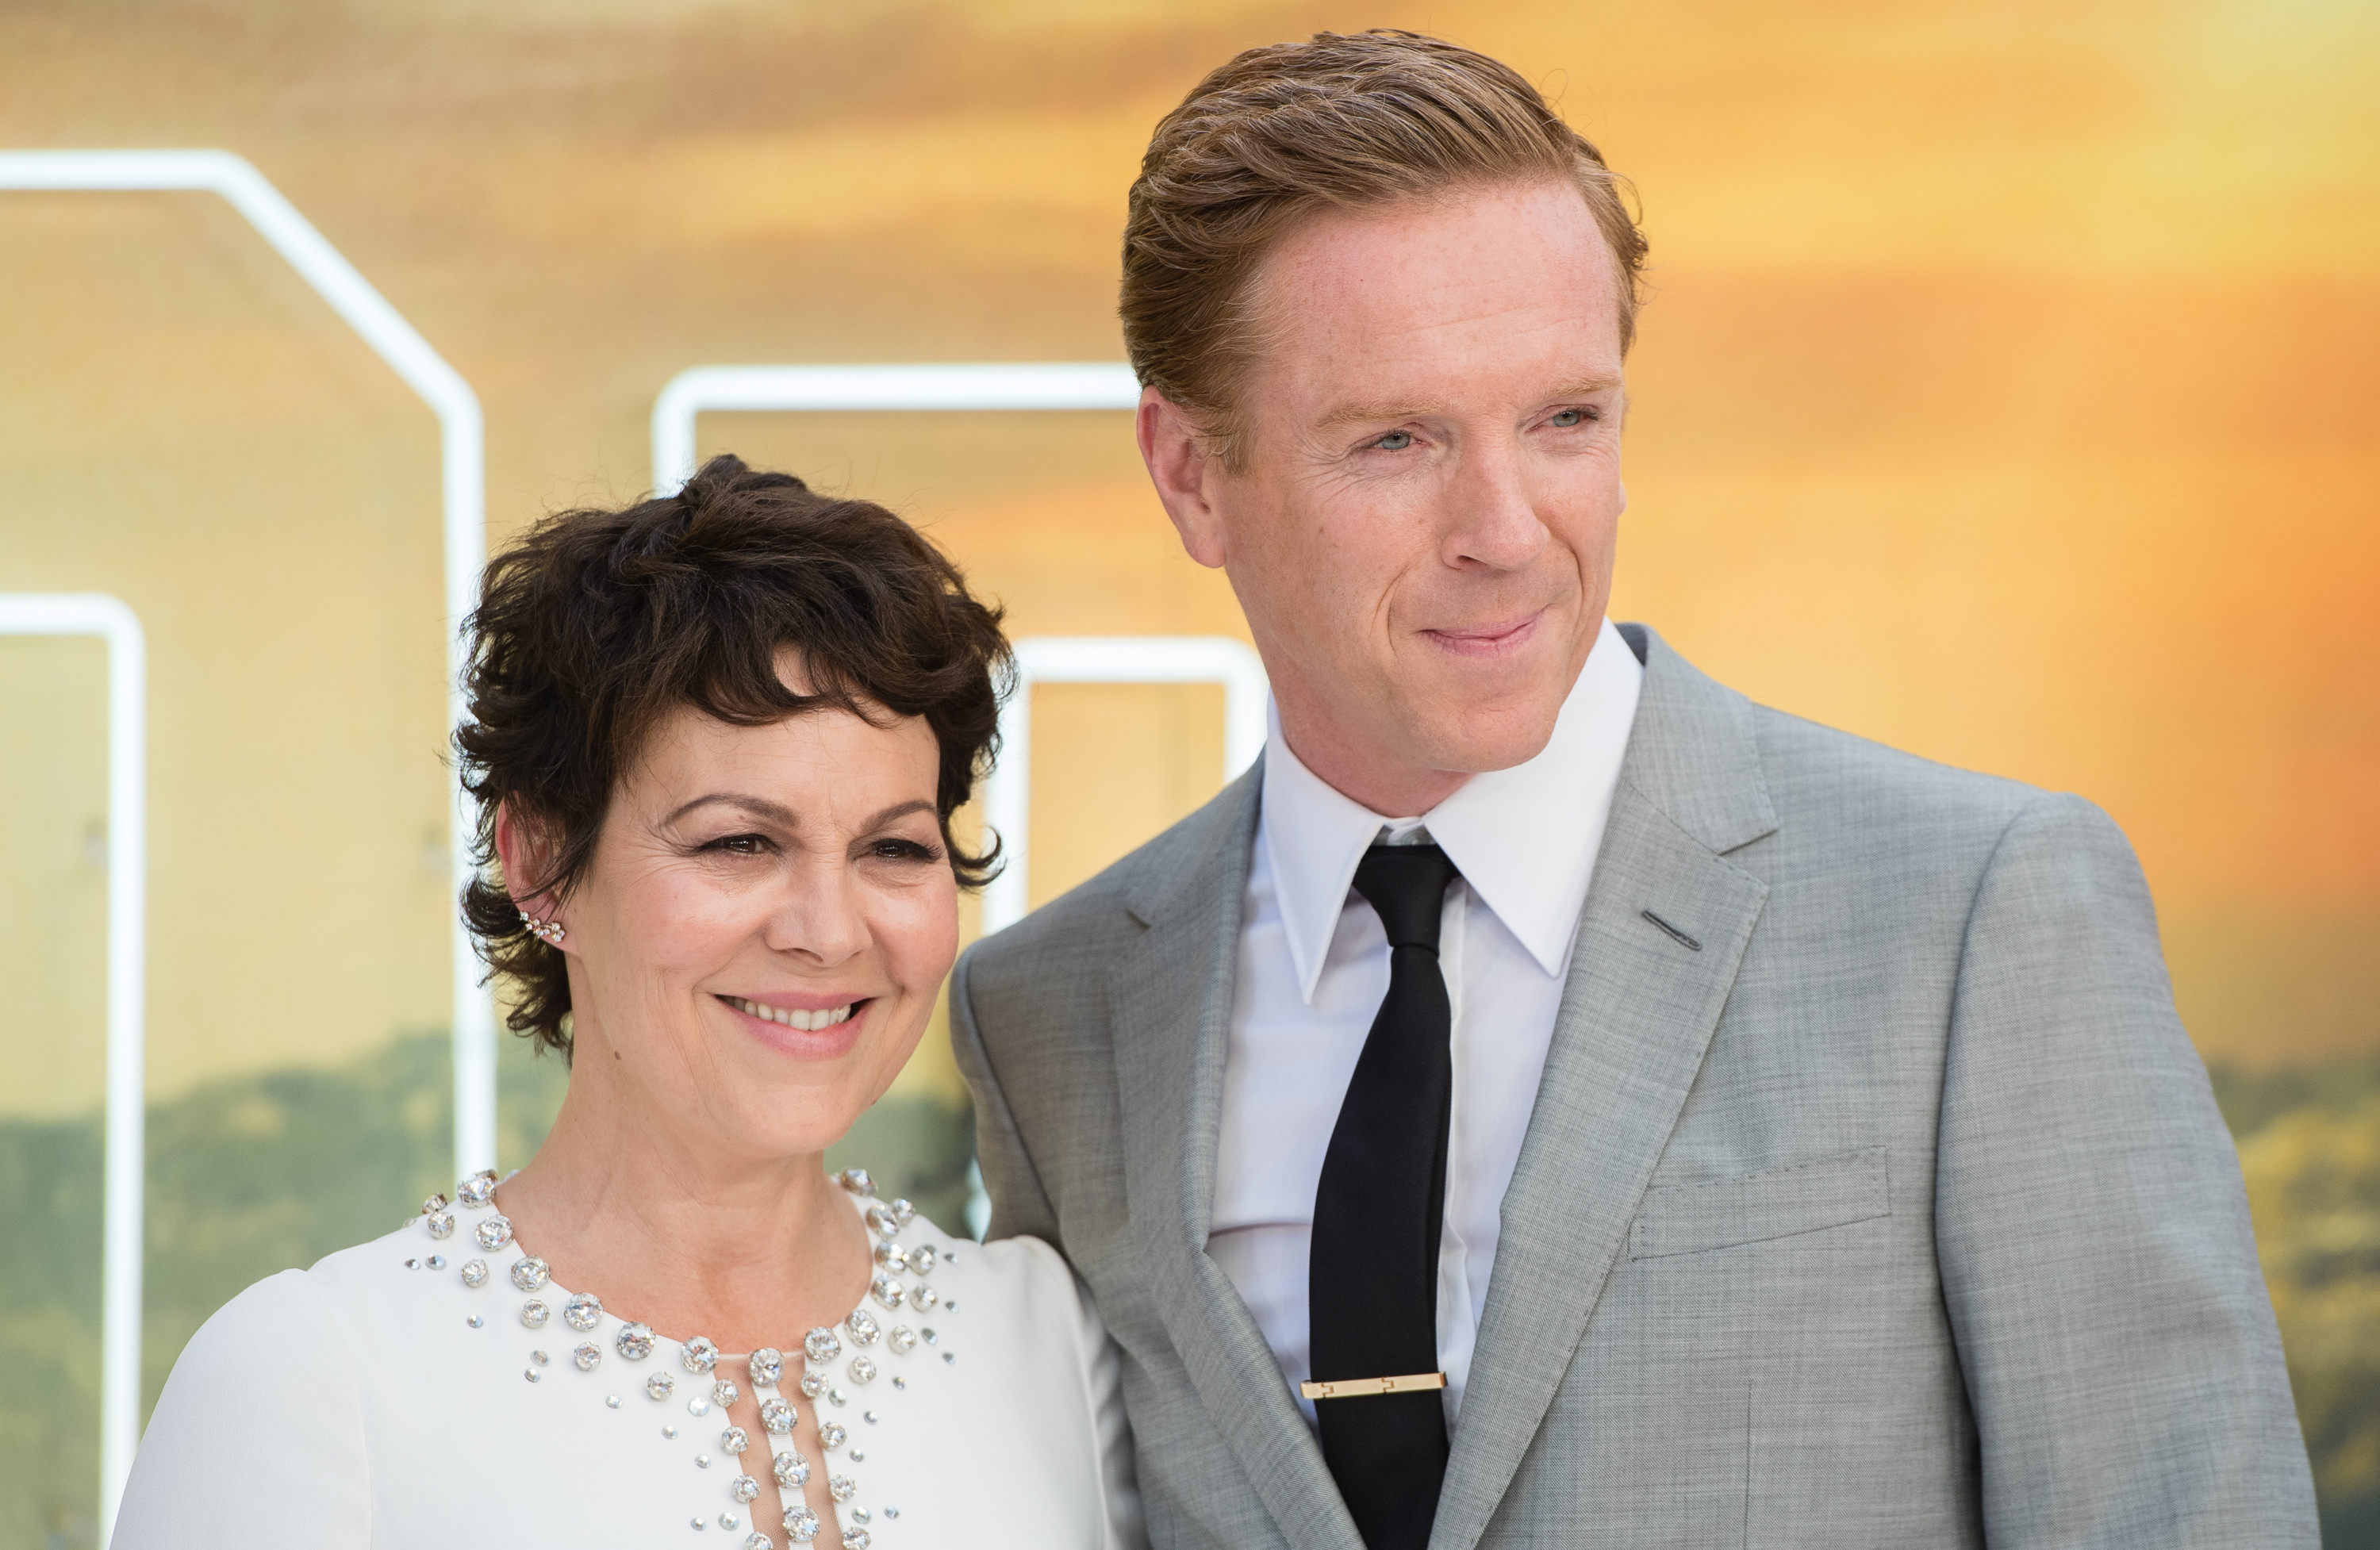 Helen McCrory und Damian Lewis besuchen die "Once Upon a Time... in Hollywood" Premiere im Odeon Luxe Leicester Square am 30. Juli 2019 in London, England. | Quelle: Getty Images